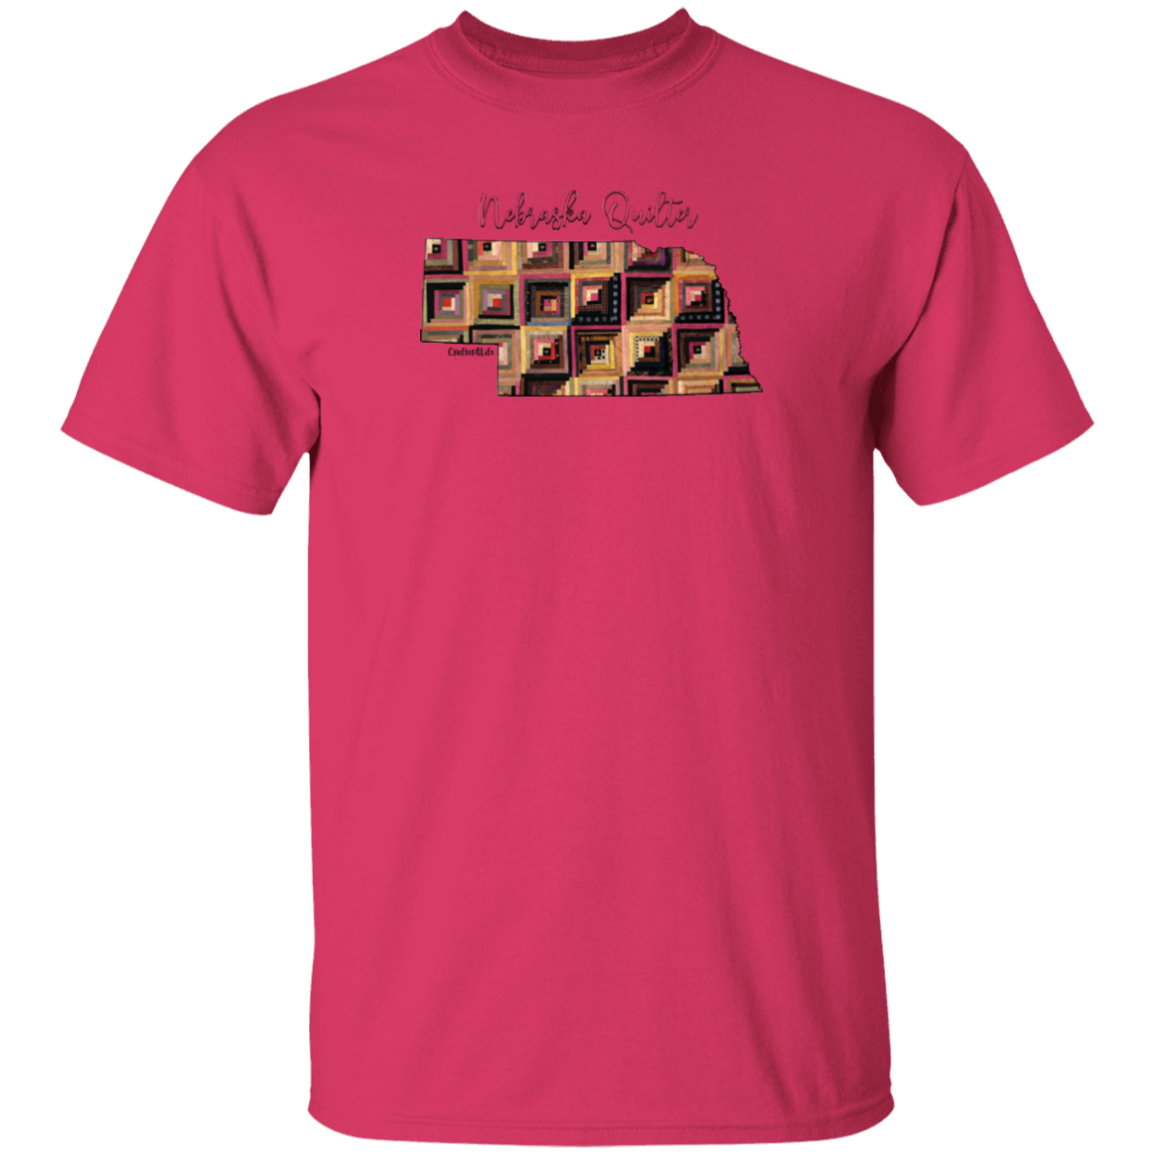 Nebraska Quilter T-Shirt, Gift for Quilting Friends and Family